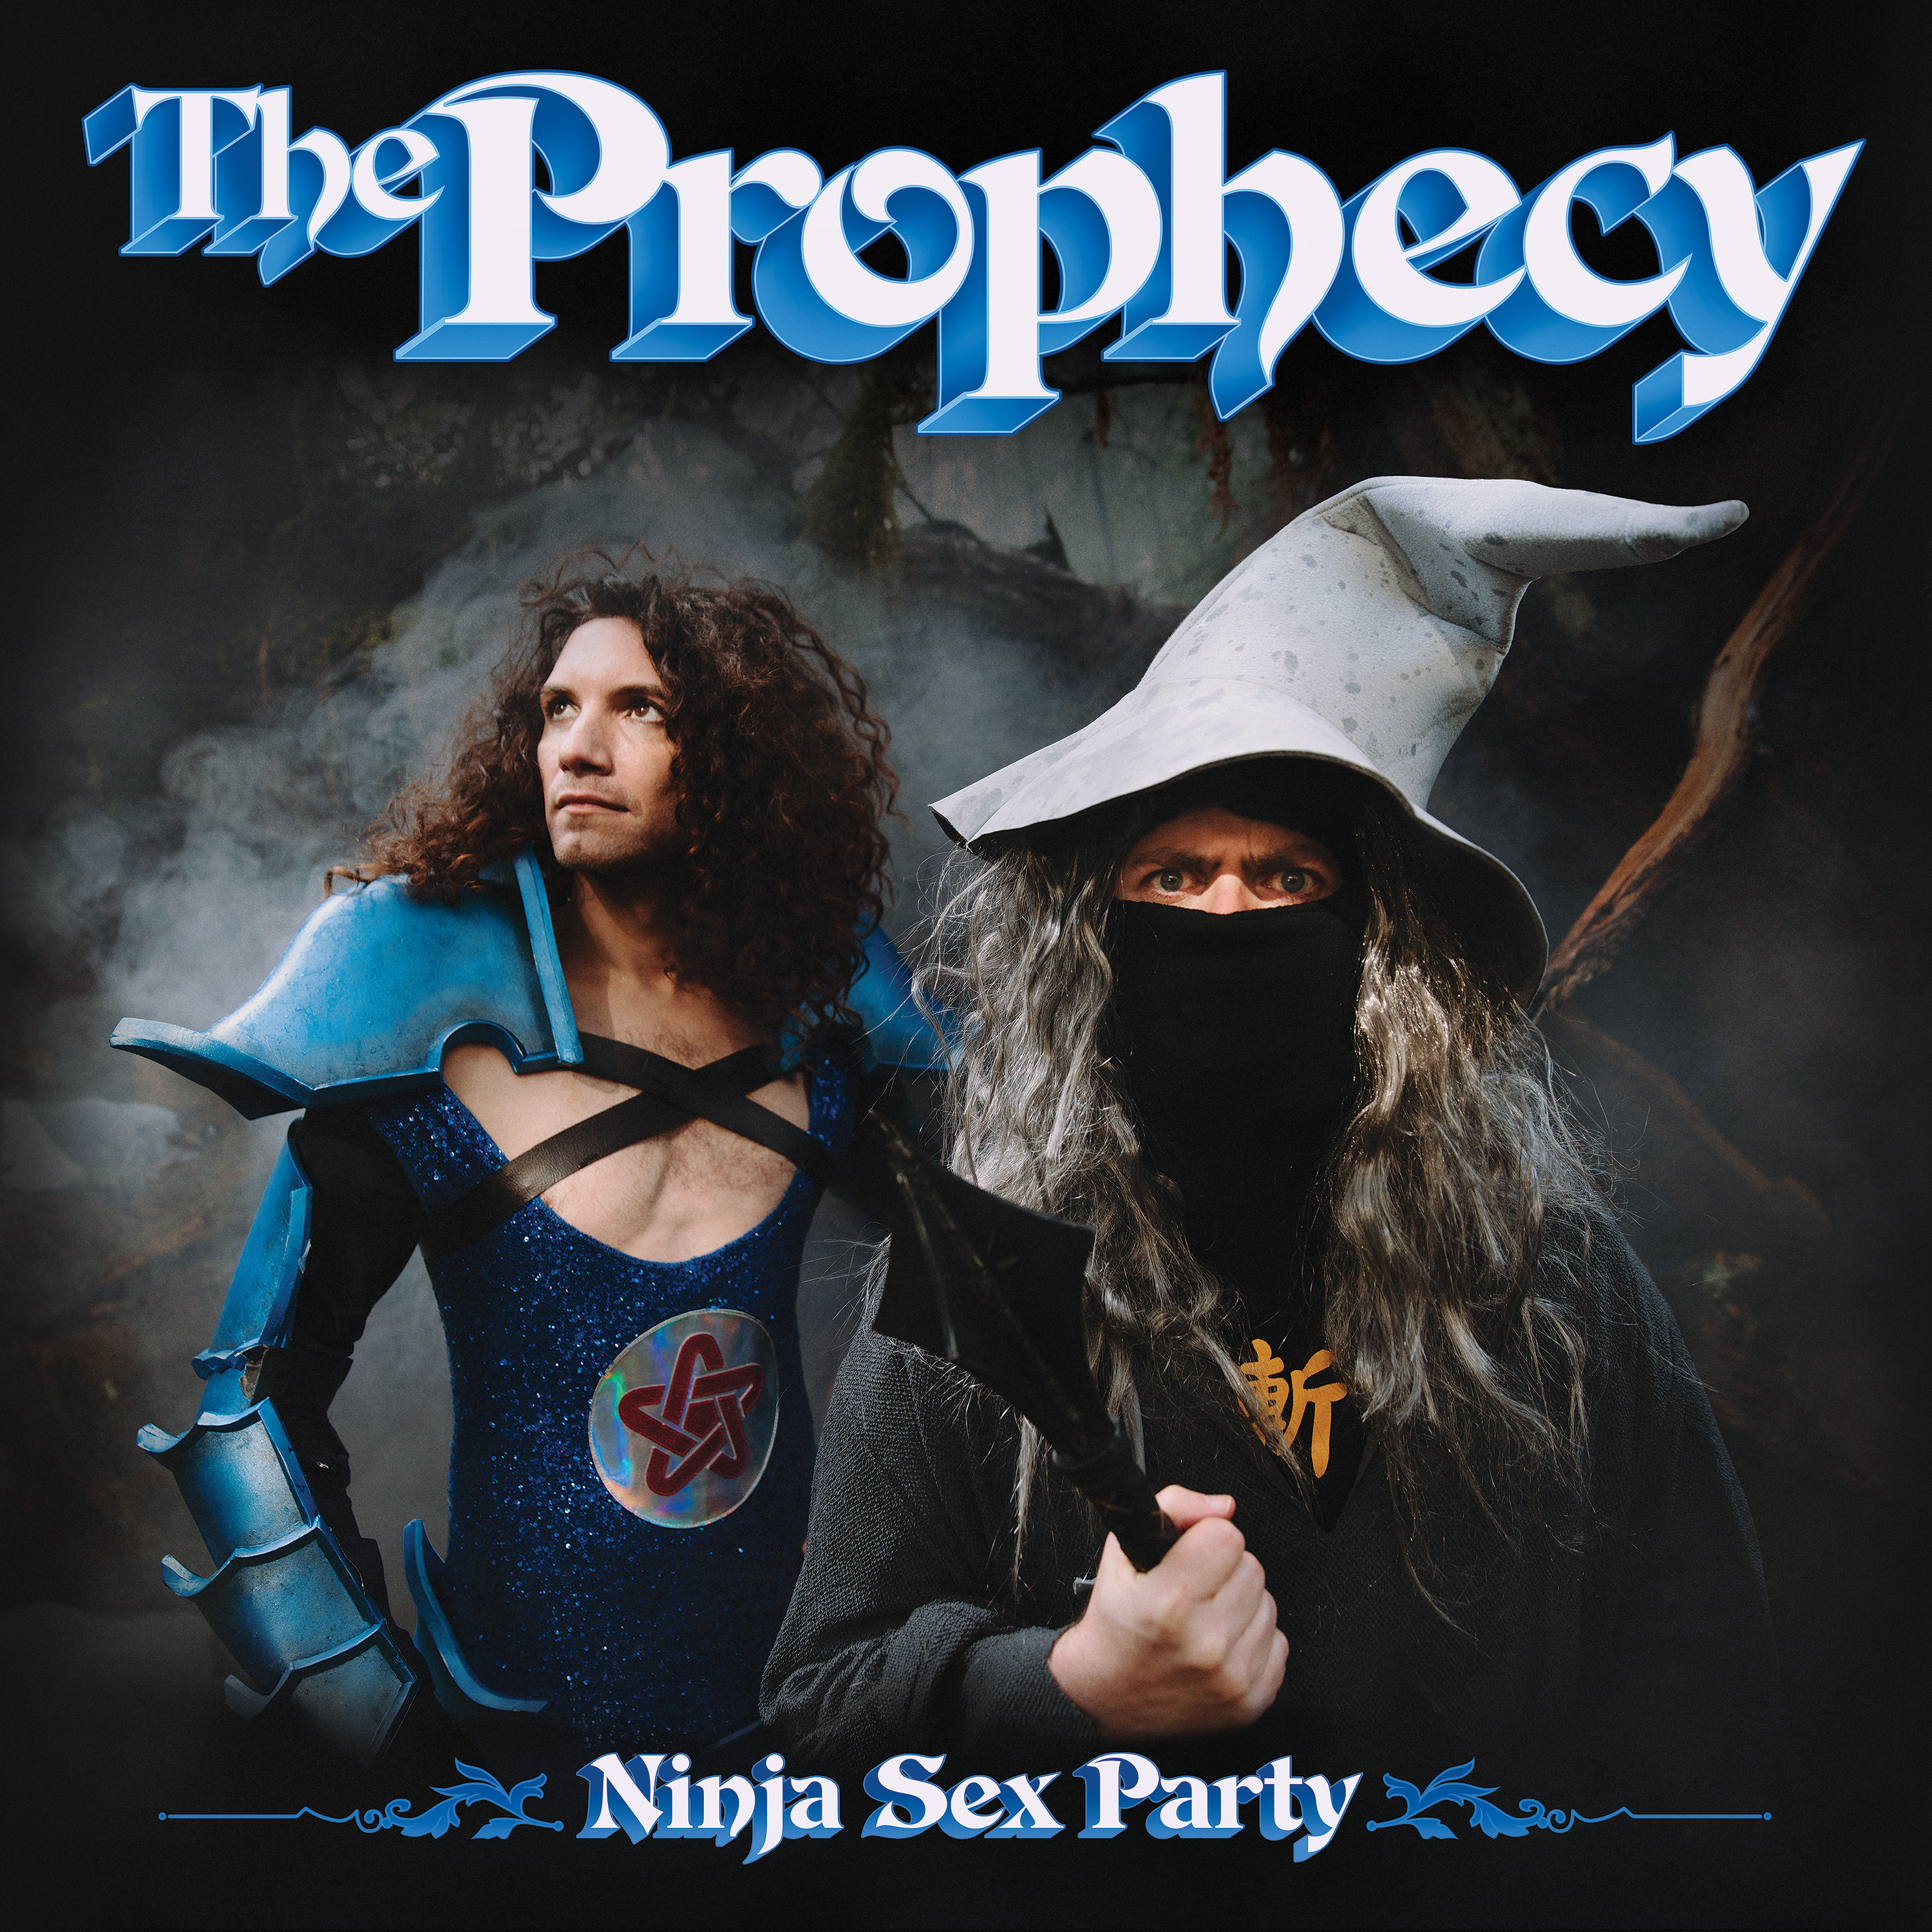 The Prophecy CD